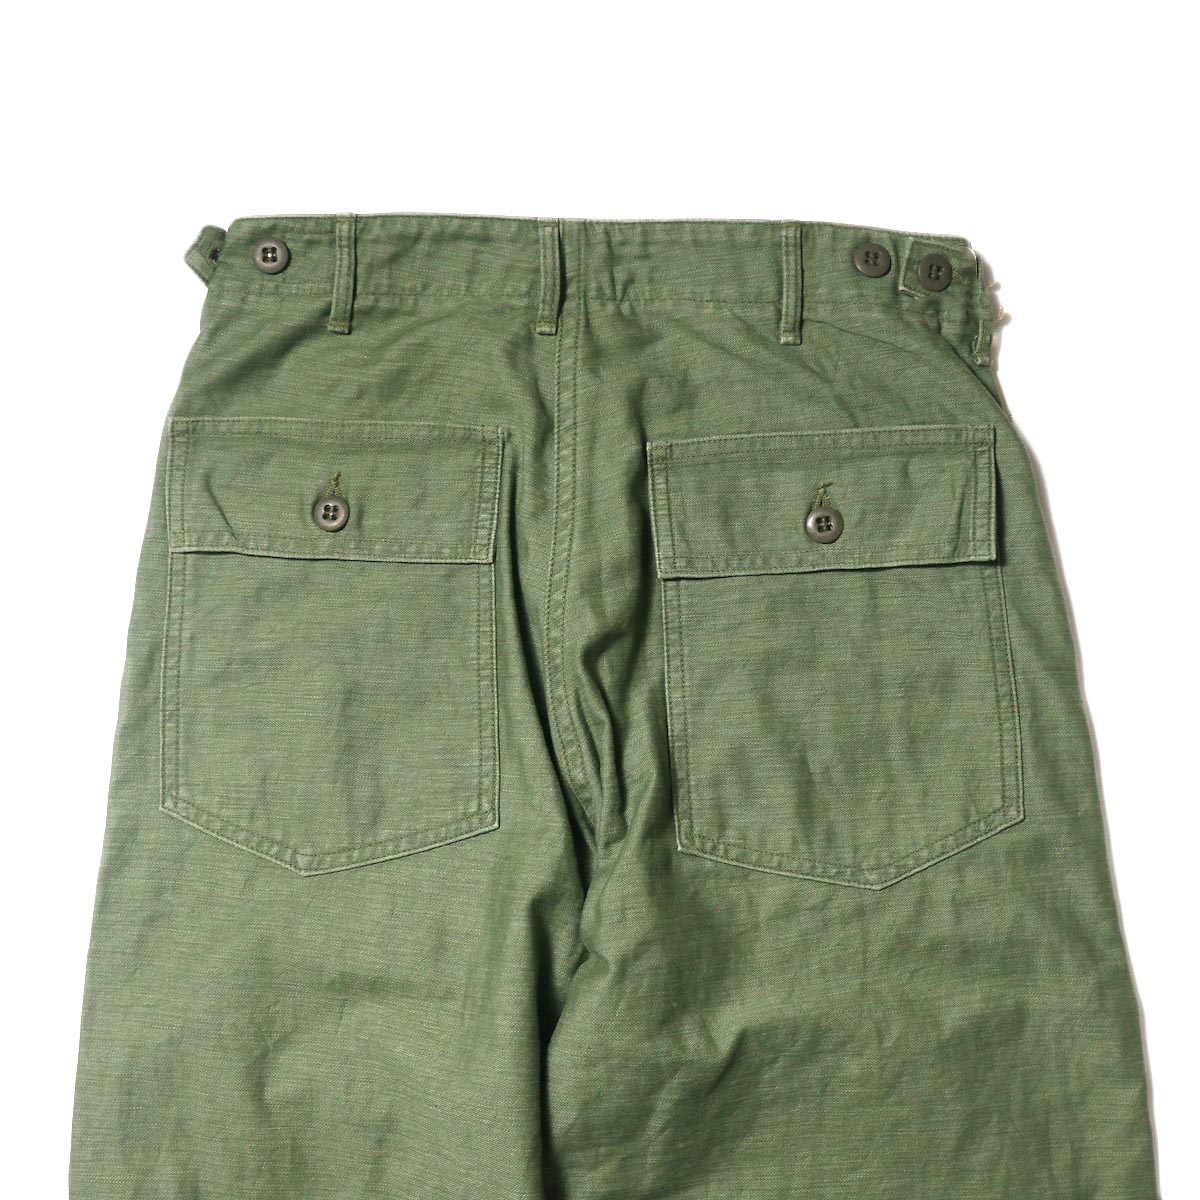 orSlow / US ARMY FATIGUE PANTS (Used Green)背面